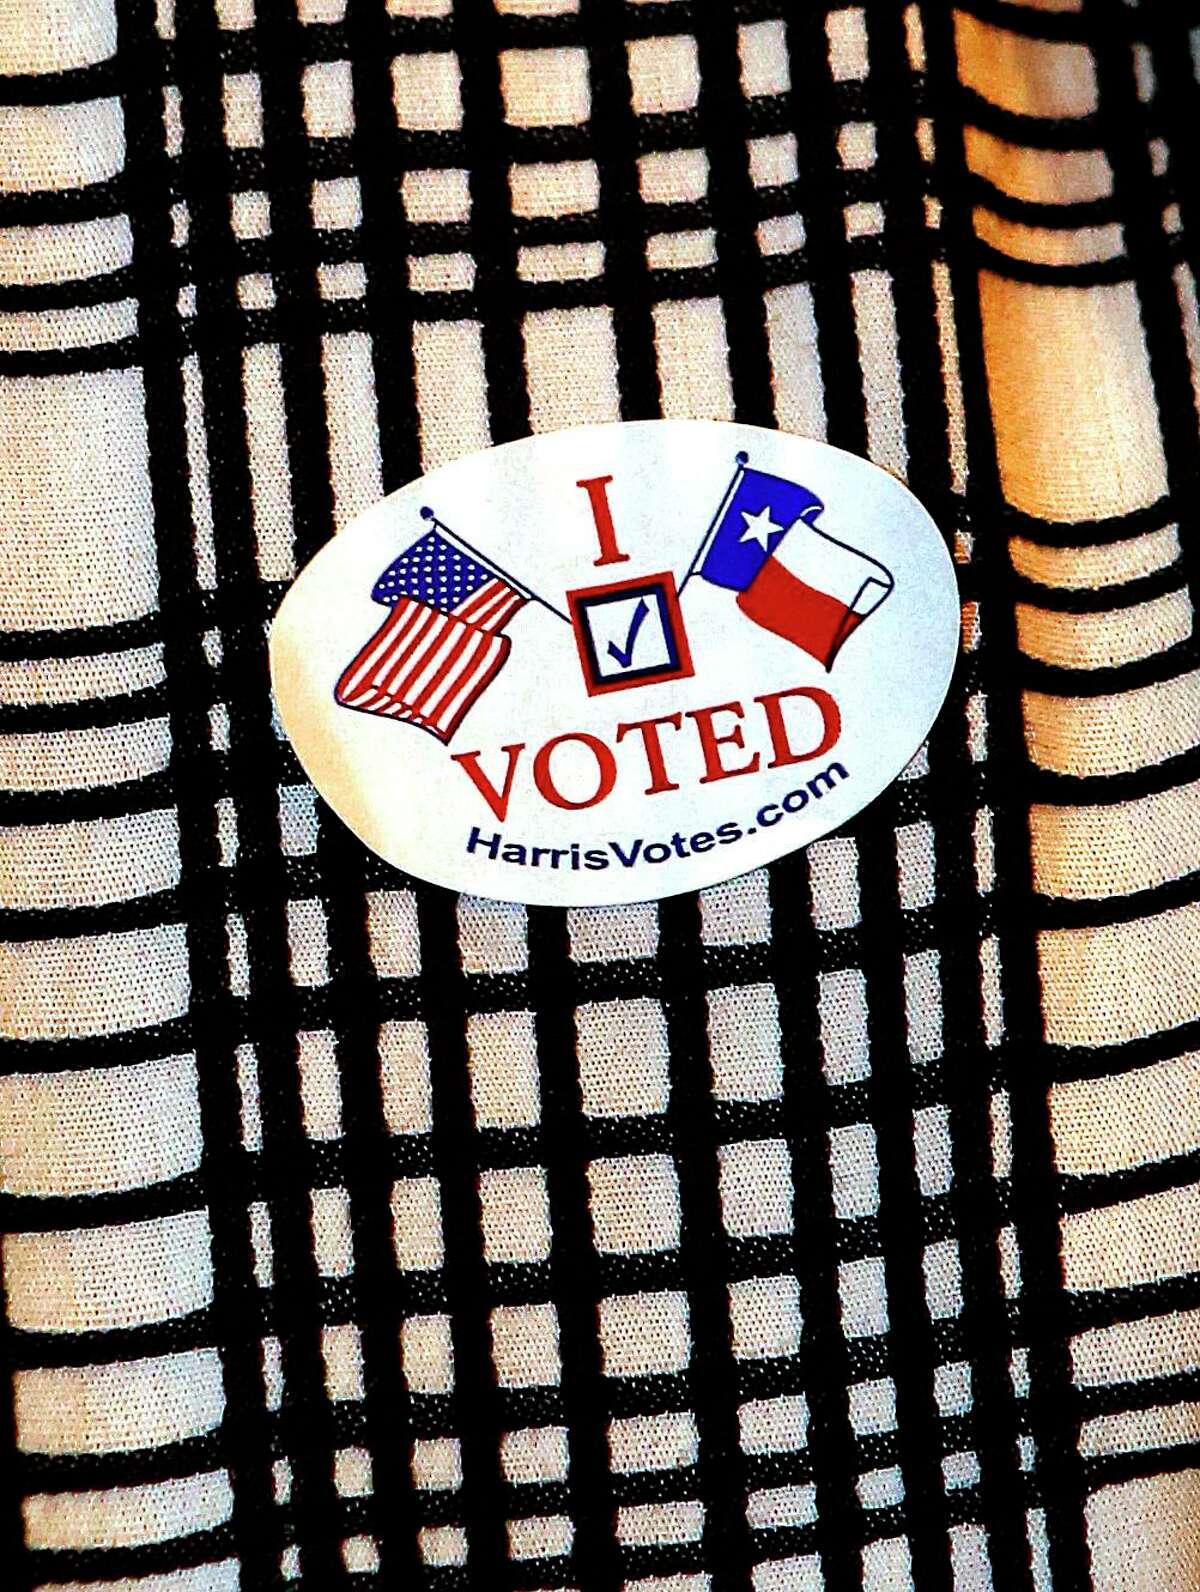 The new "I Voted" sticker from 2015, in Houston.